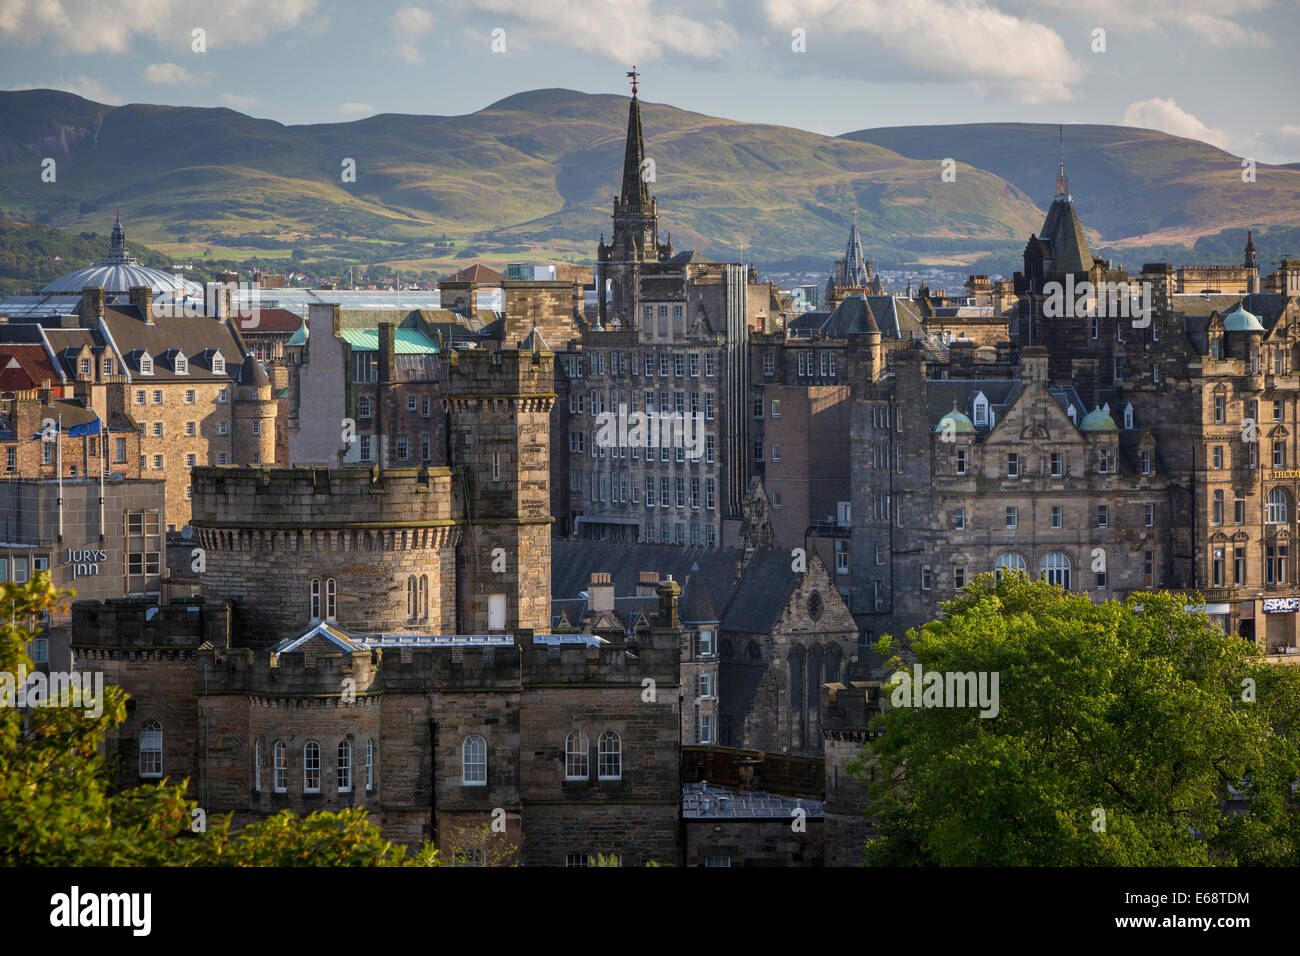 Old St Andrew's House and buildings of Edinburgh, Scotland Stock Photo